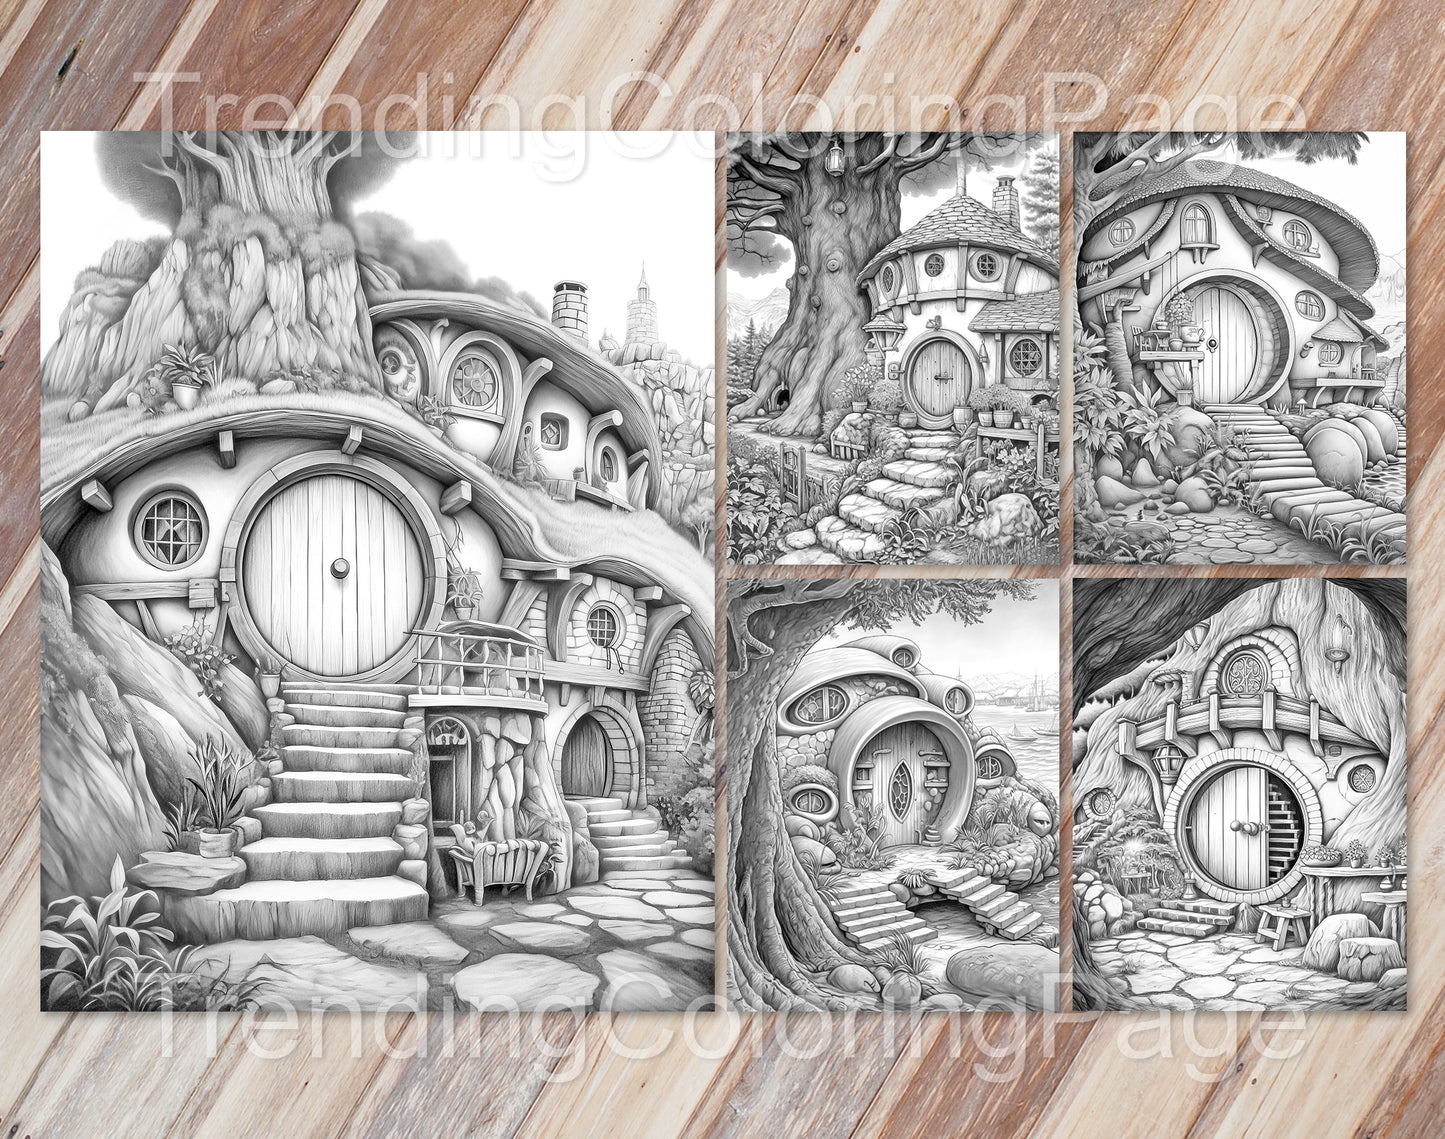 50 Mystical Woodland Retreat Grayscale Coloring Pages- Instant Download - Printable PDF Dark/Light